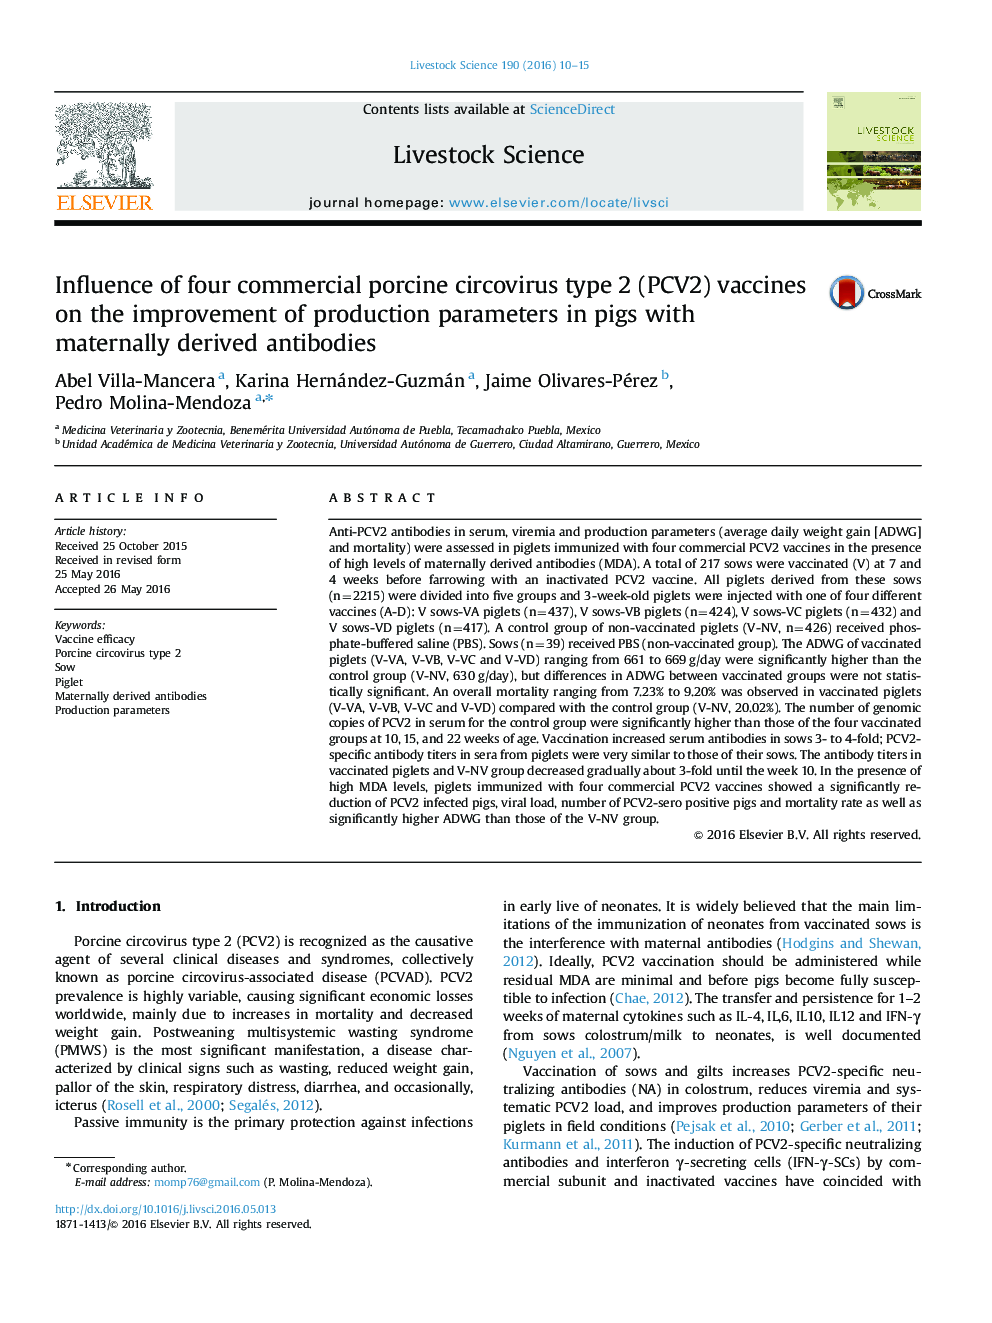 Influence of four commercial porcine circovirus type 2 (PCV2) vaccines on the improvement of production parameters in pigs with maternally derived antibodies